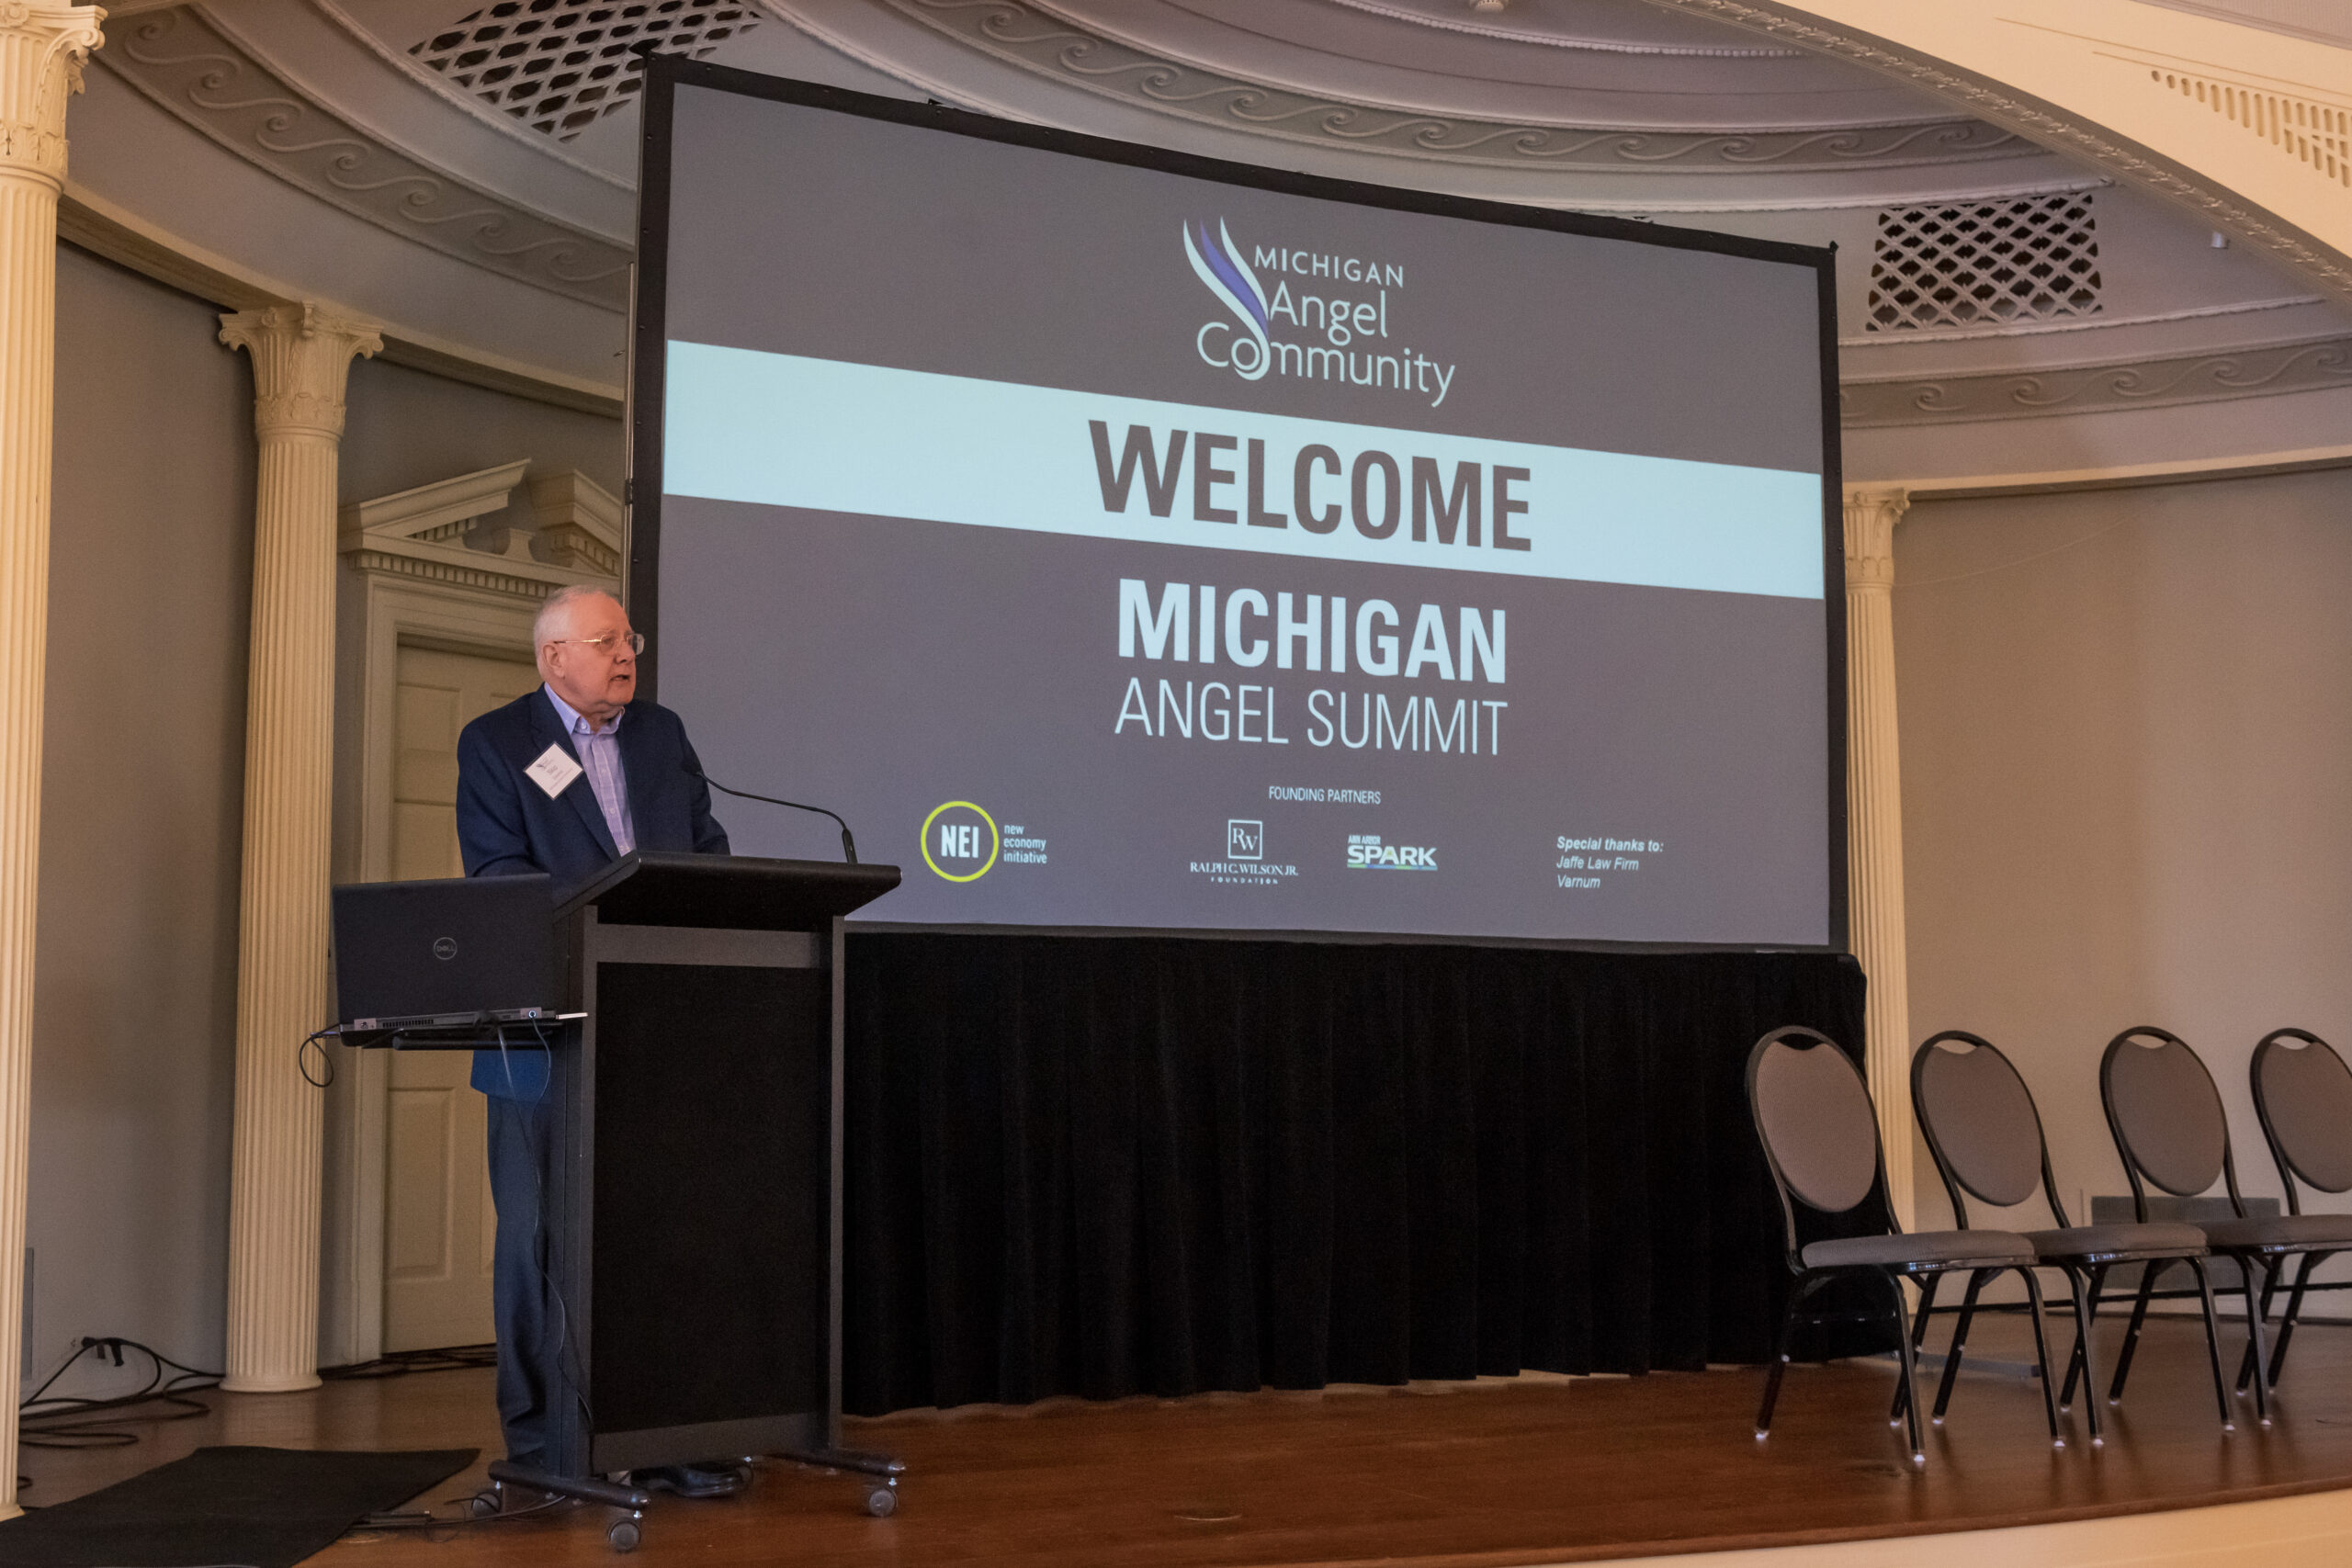 Skip Simms, Michigan Angel Community director and senior vice president of Ann Arbor SPARK, offers his opening remarks to begin the summit.